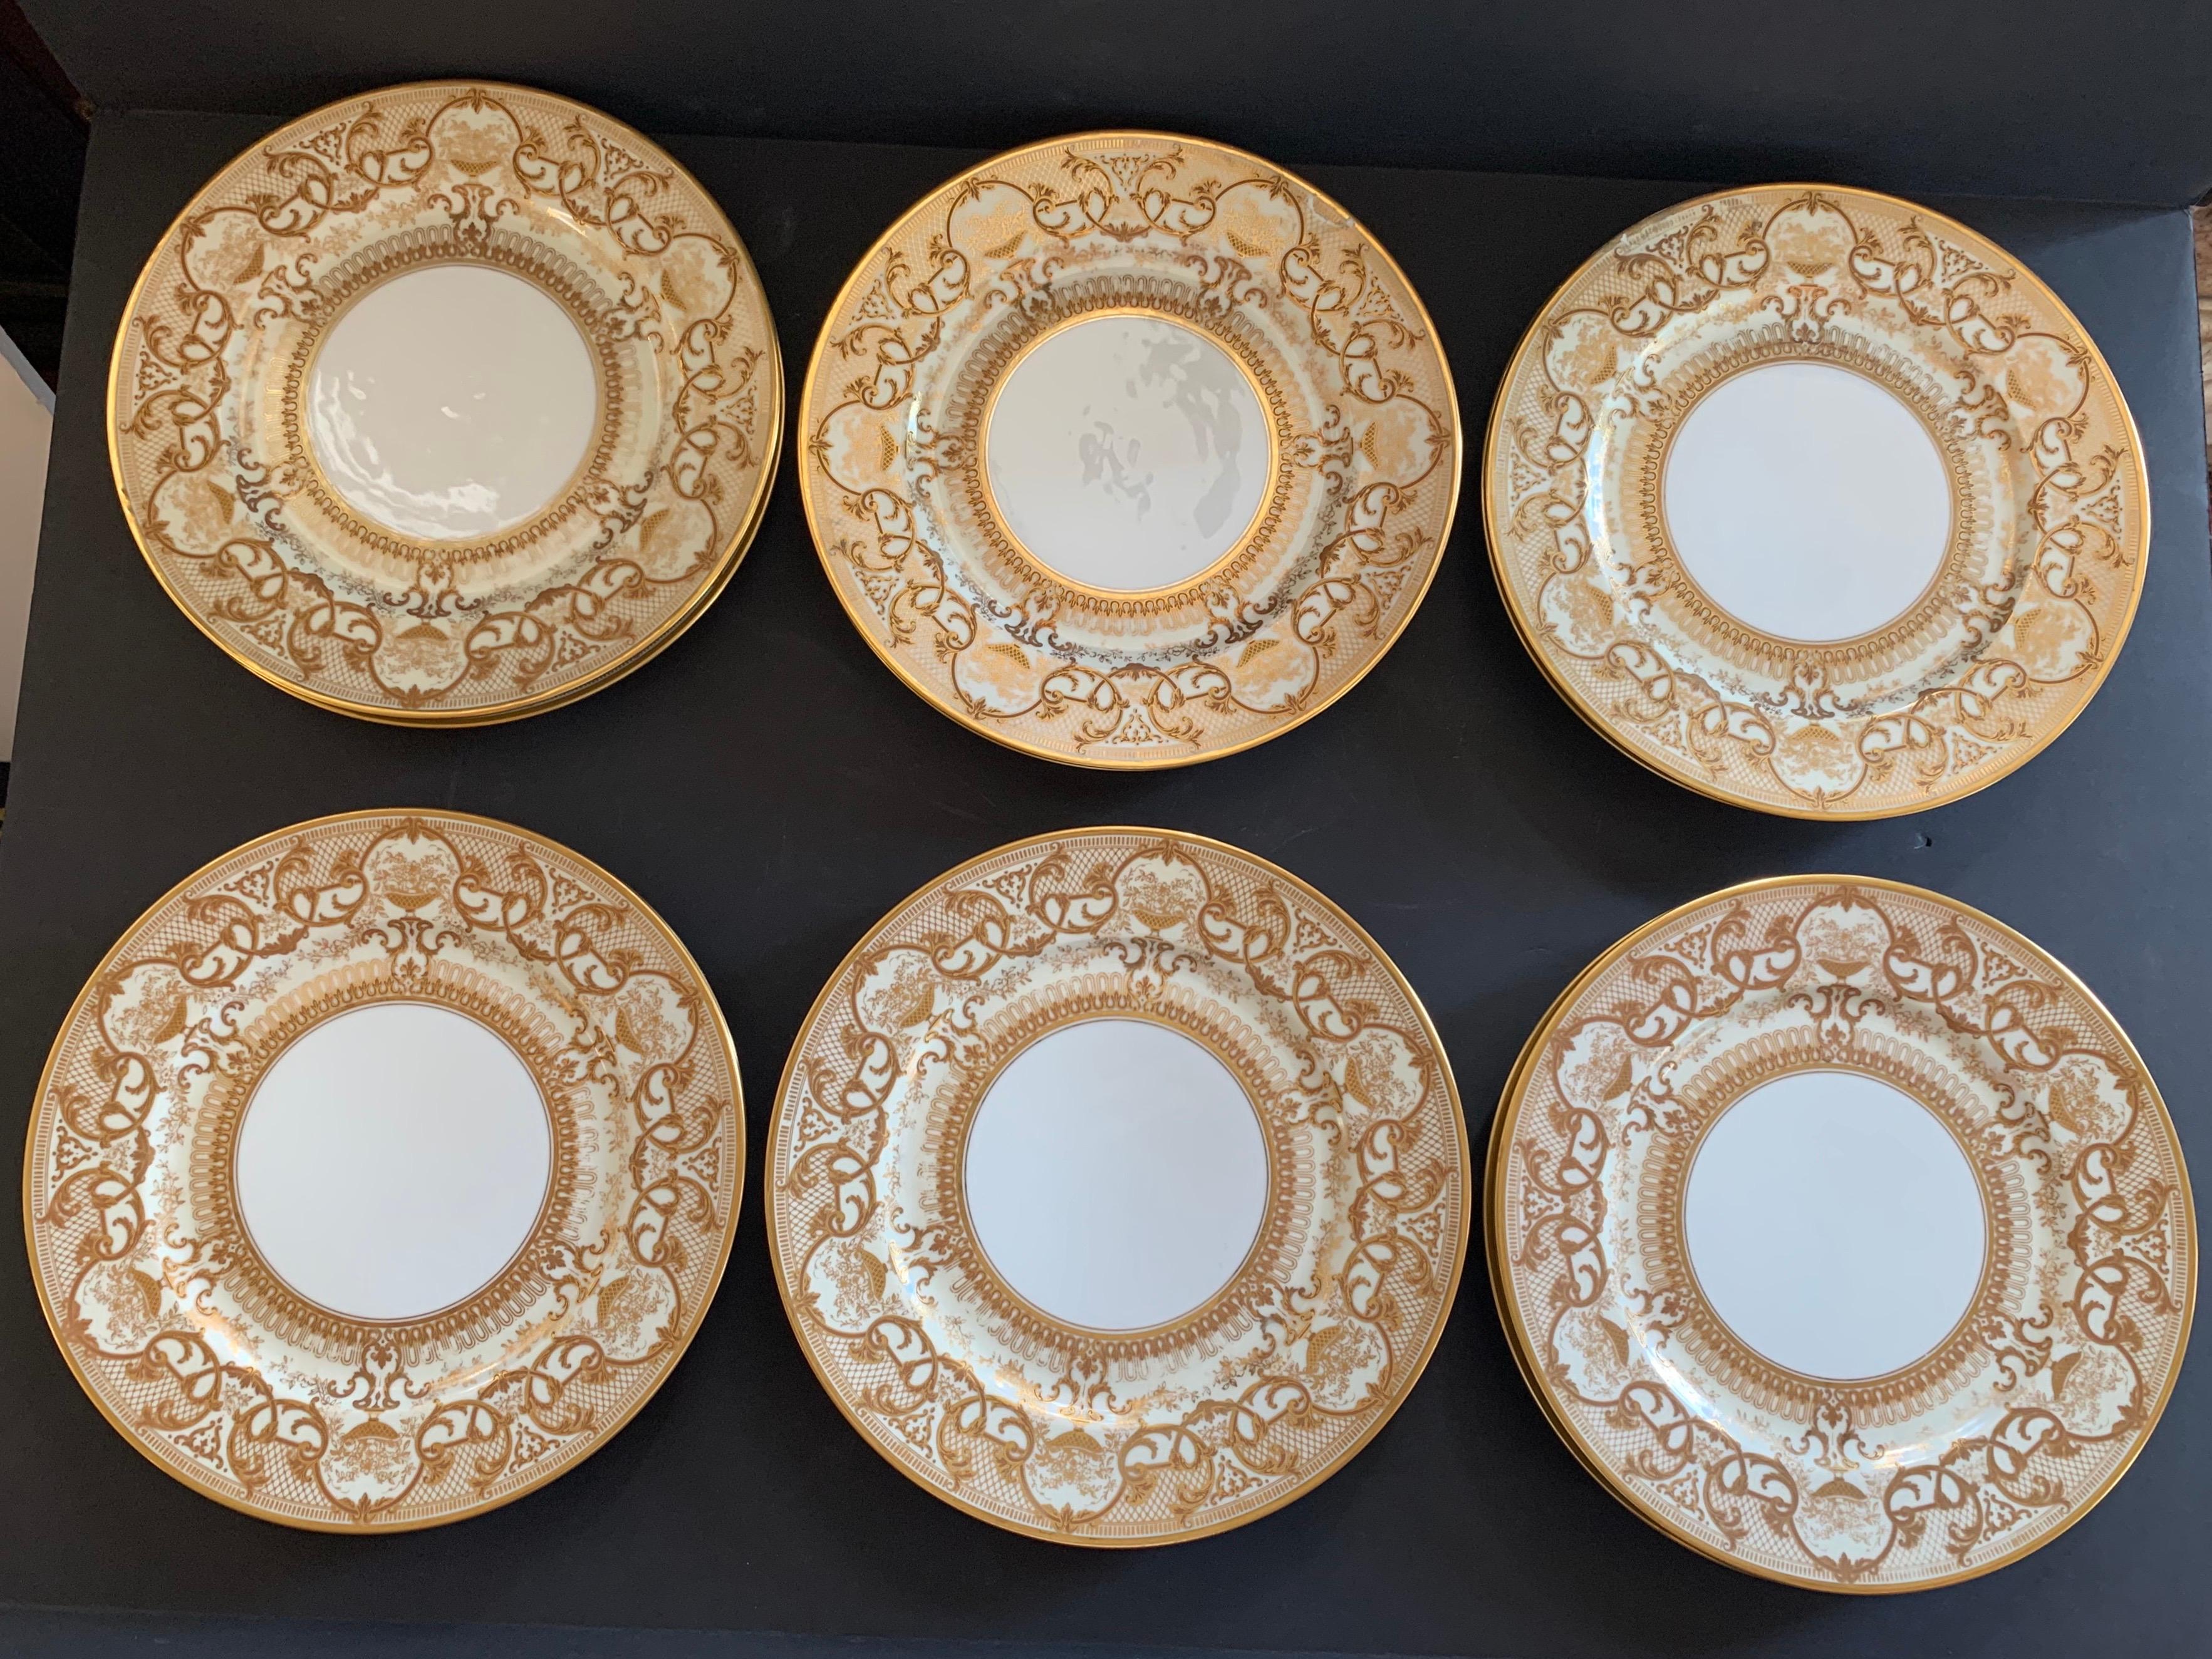 French Wonderful Service Plates Set 12 Limoges France White Gold Flower Bouquet Dishes 